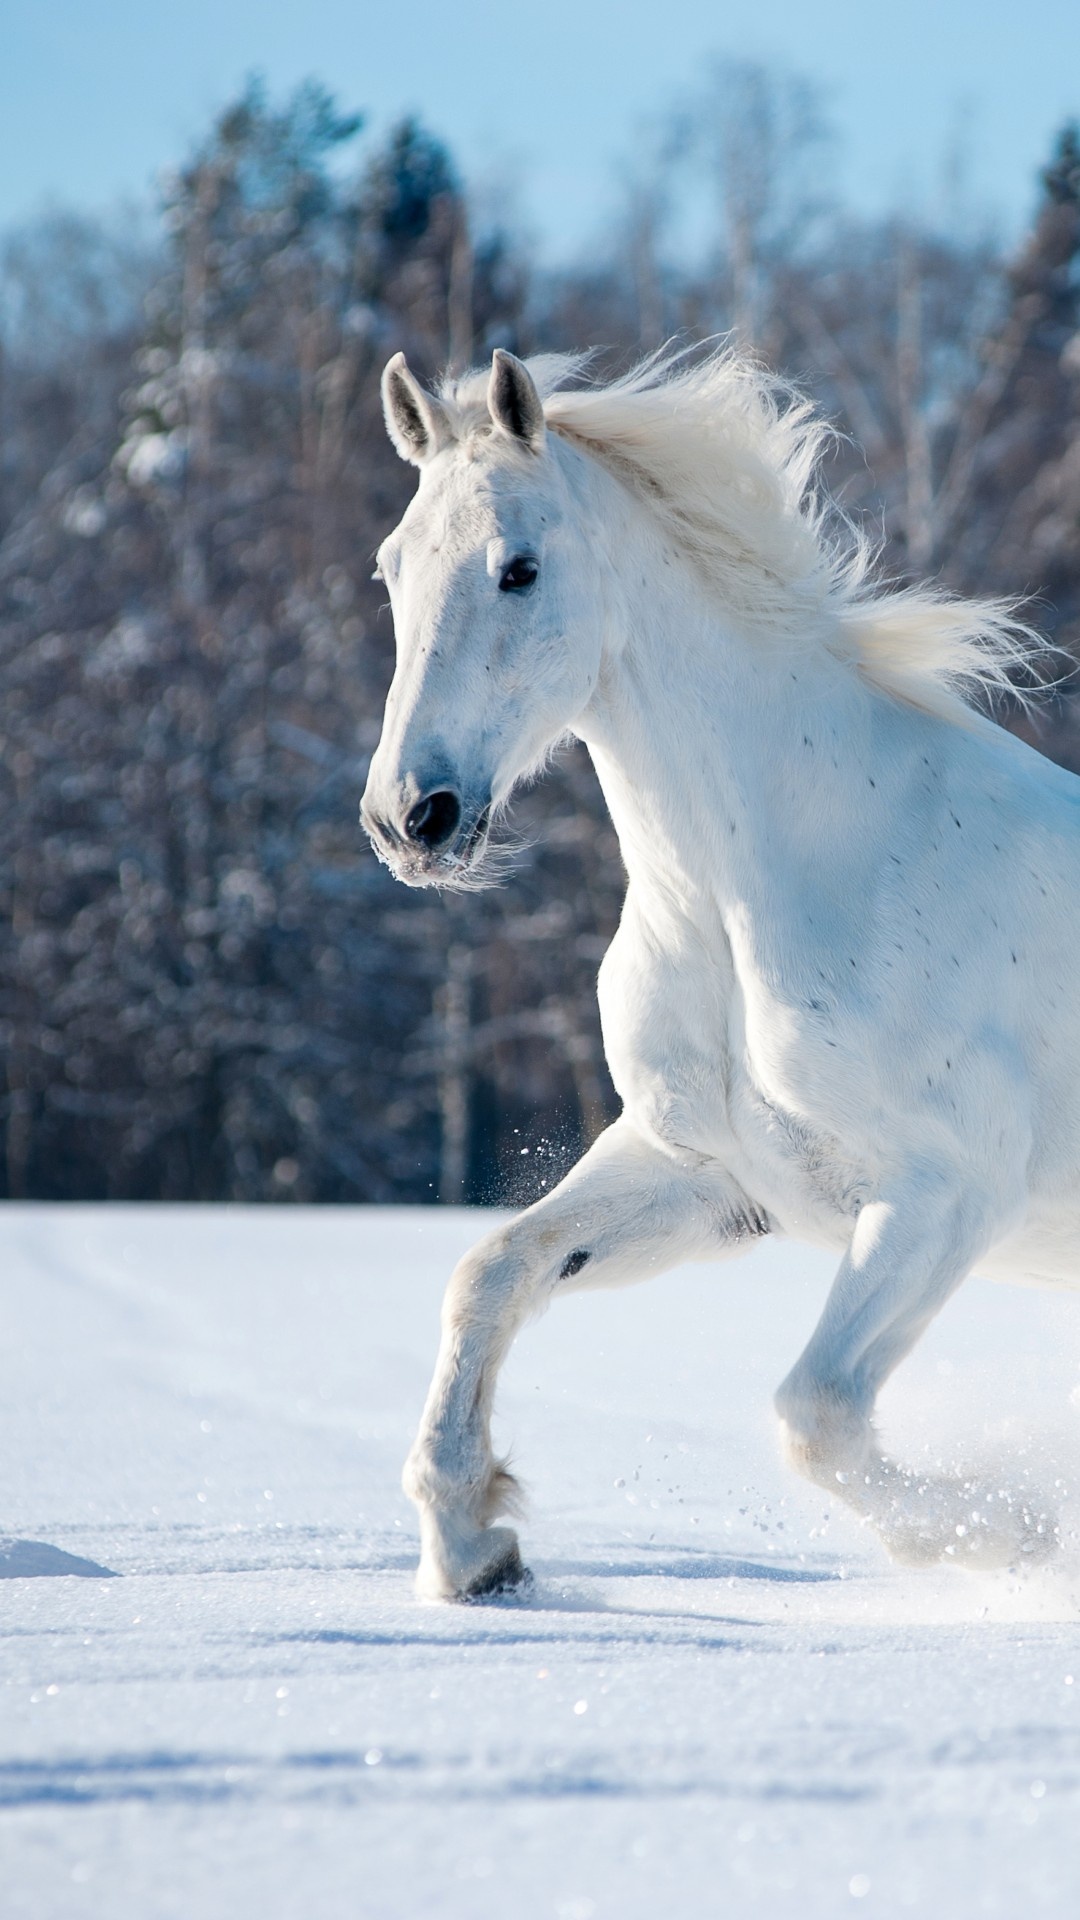 Horses in the Snow, Cute animals, Winter wonderland, Snowy landscapes, 1080x1920 Full HD Phone